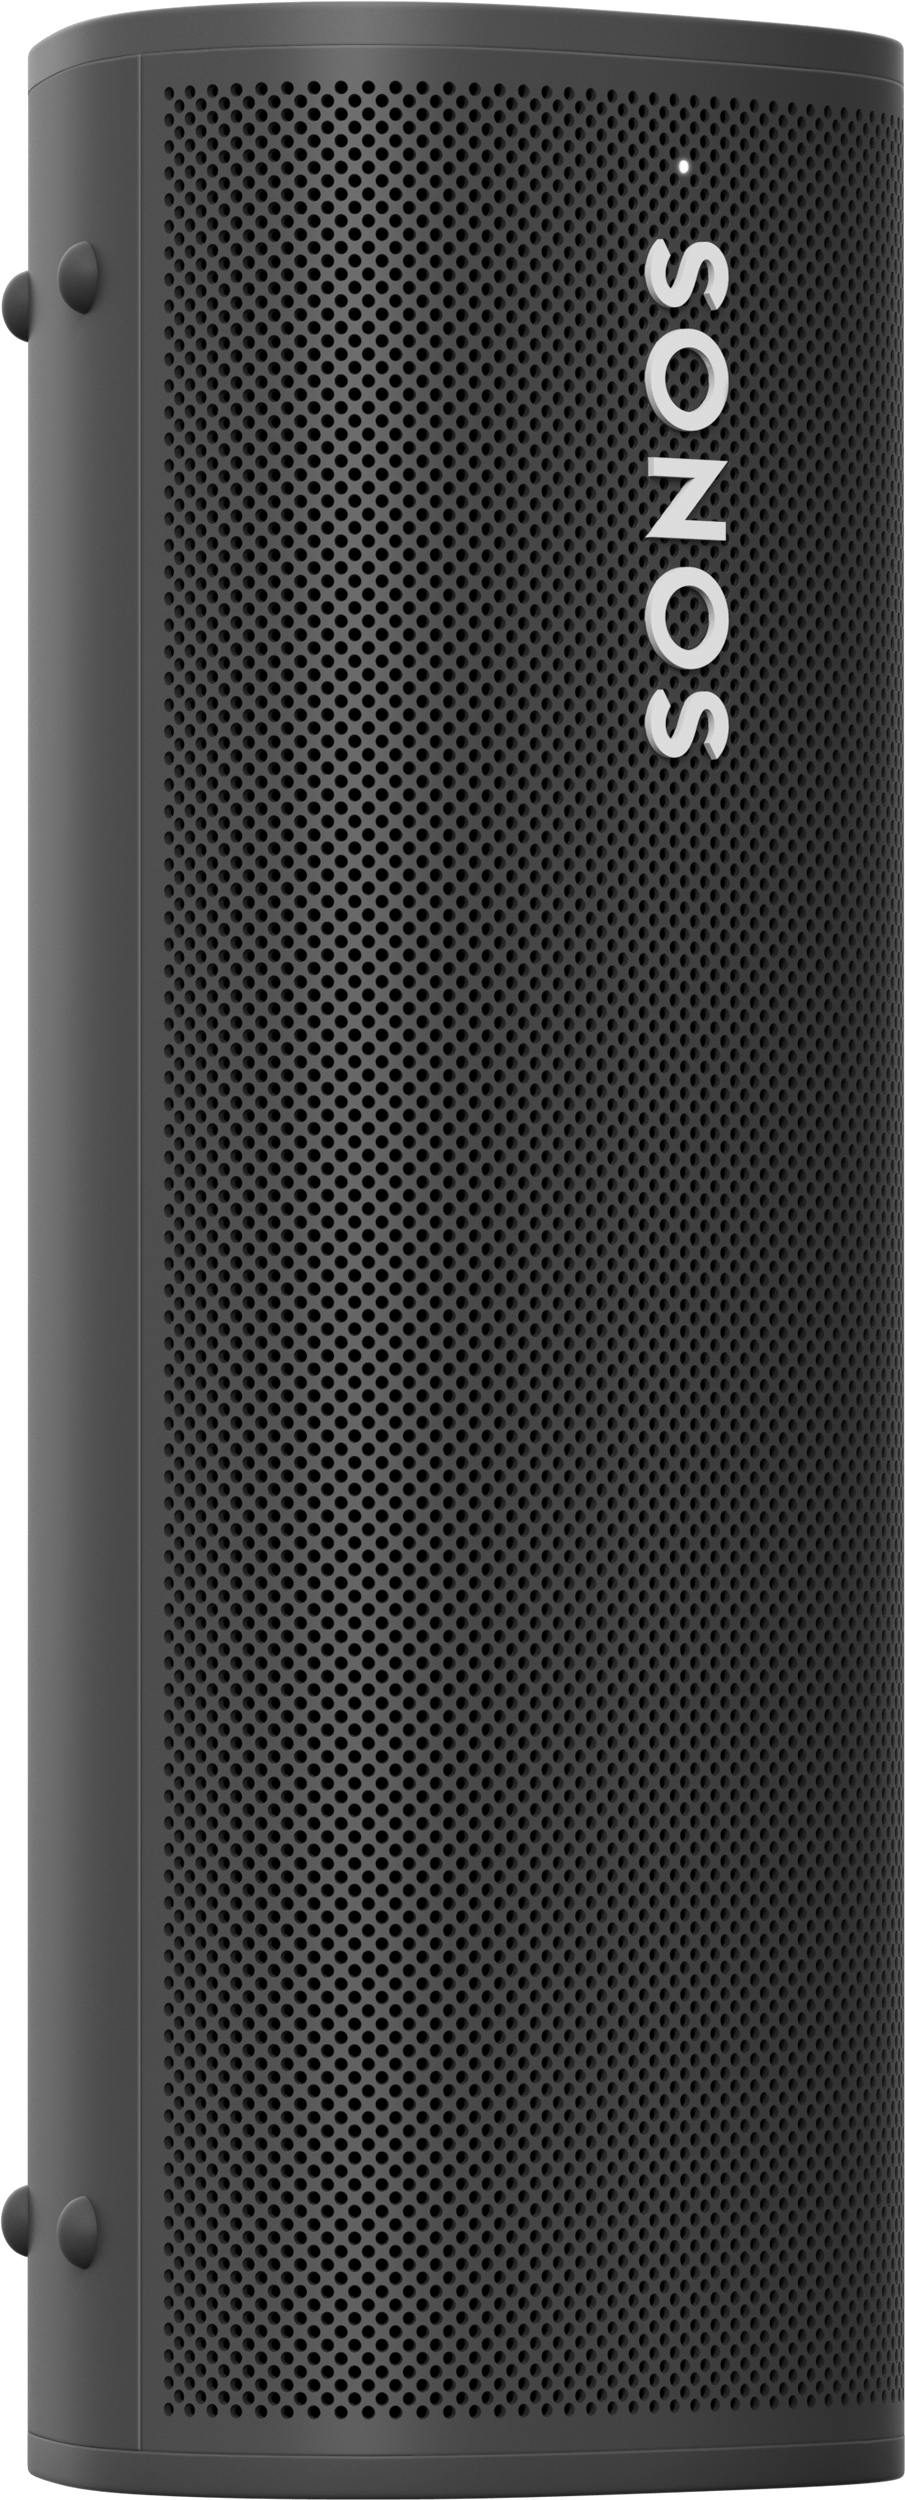 a sonos speaker is sitting on a white surface .